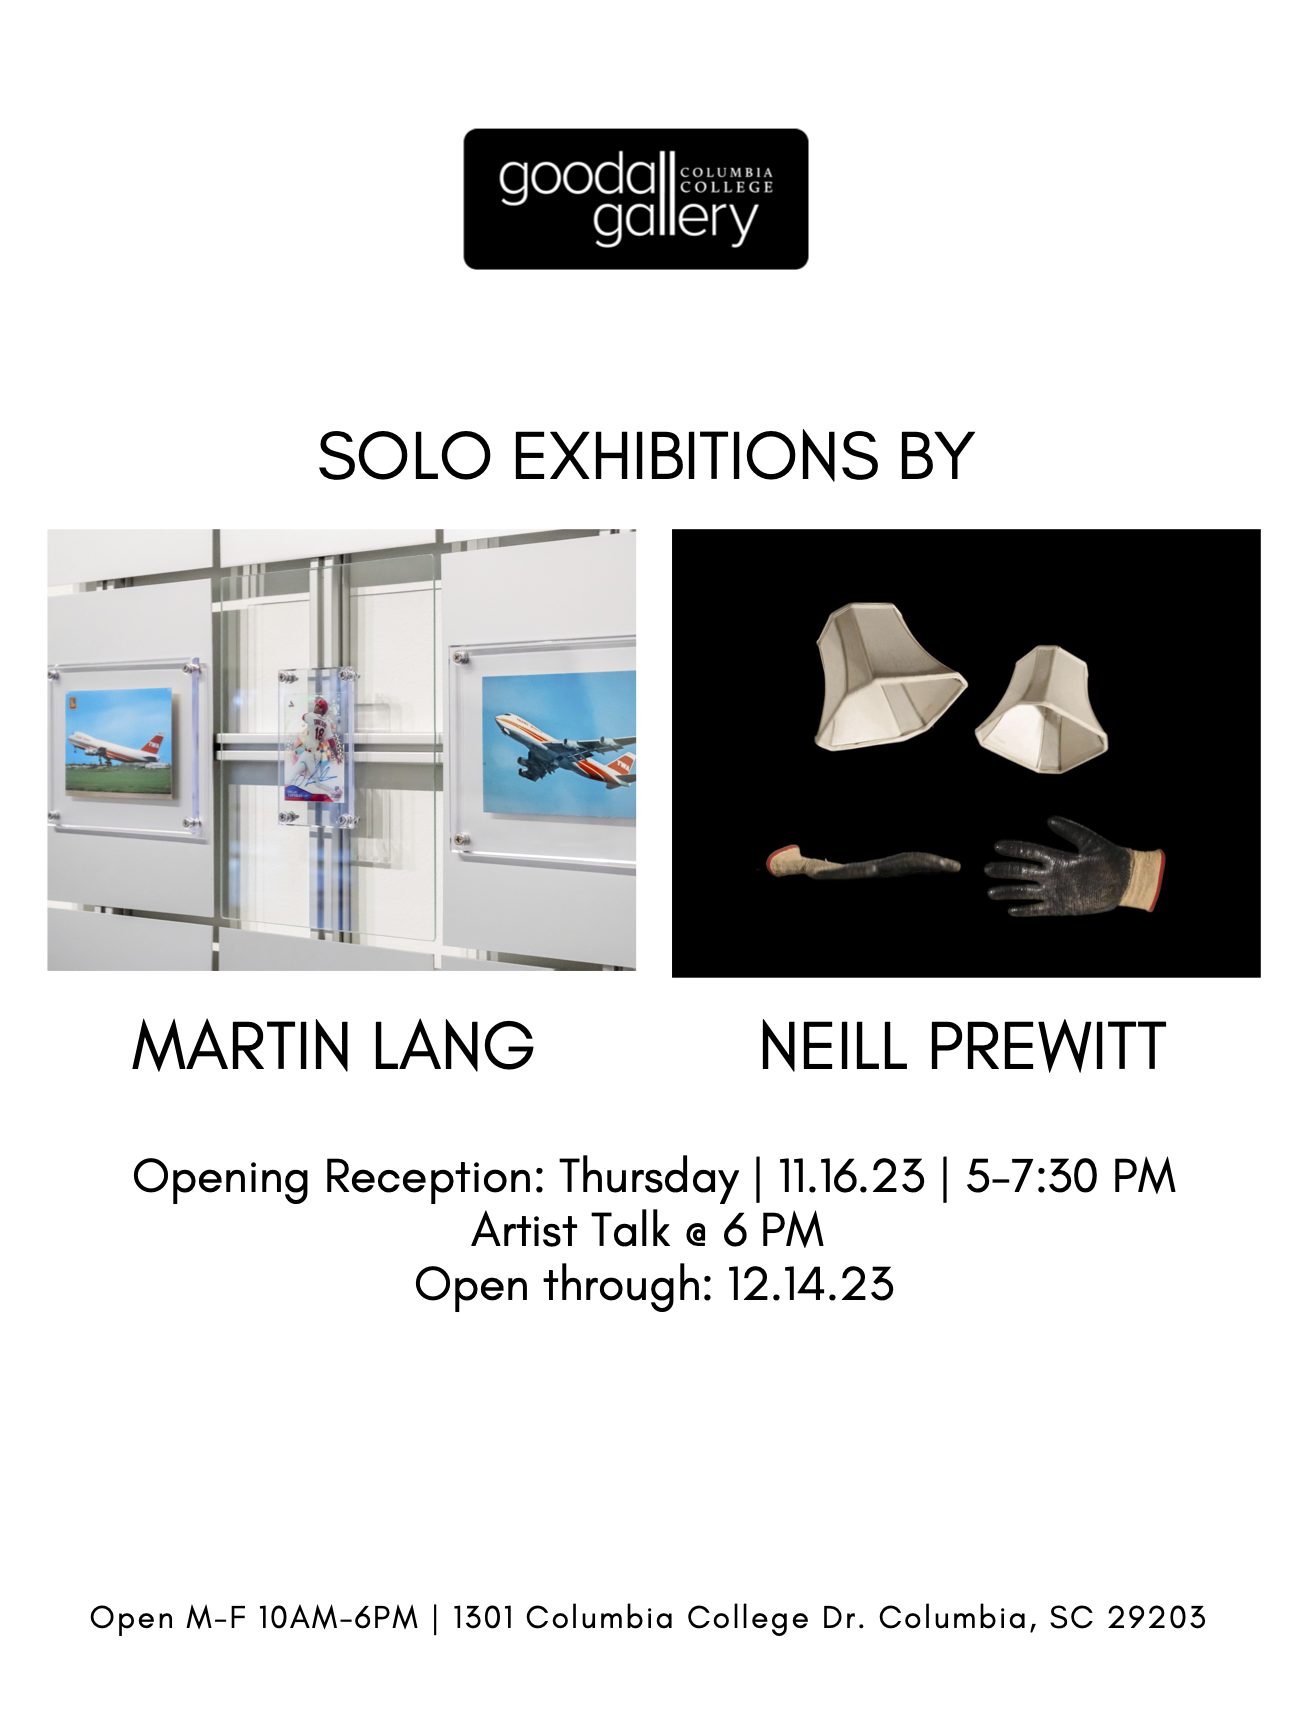 goodall gallery columbia college - solo exhibitions by martin lang and neil prewitt - opening reception: Thursday, November 16, 2023 from 5-7:30pm - Artist Talk at 6pm - open through December 14, 2023